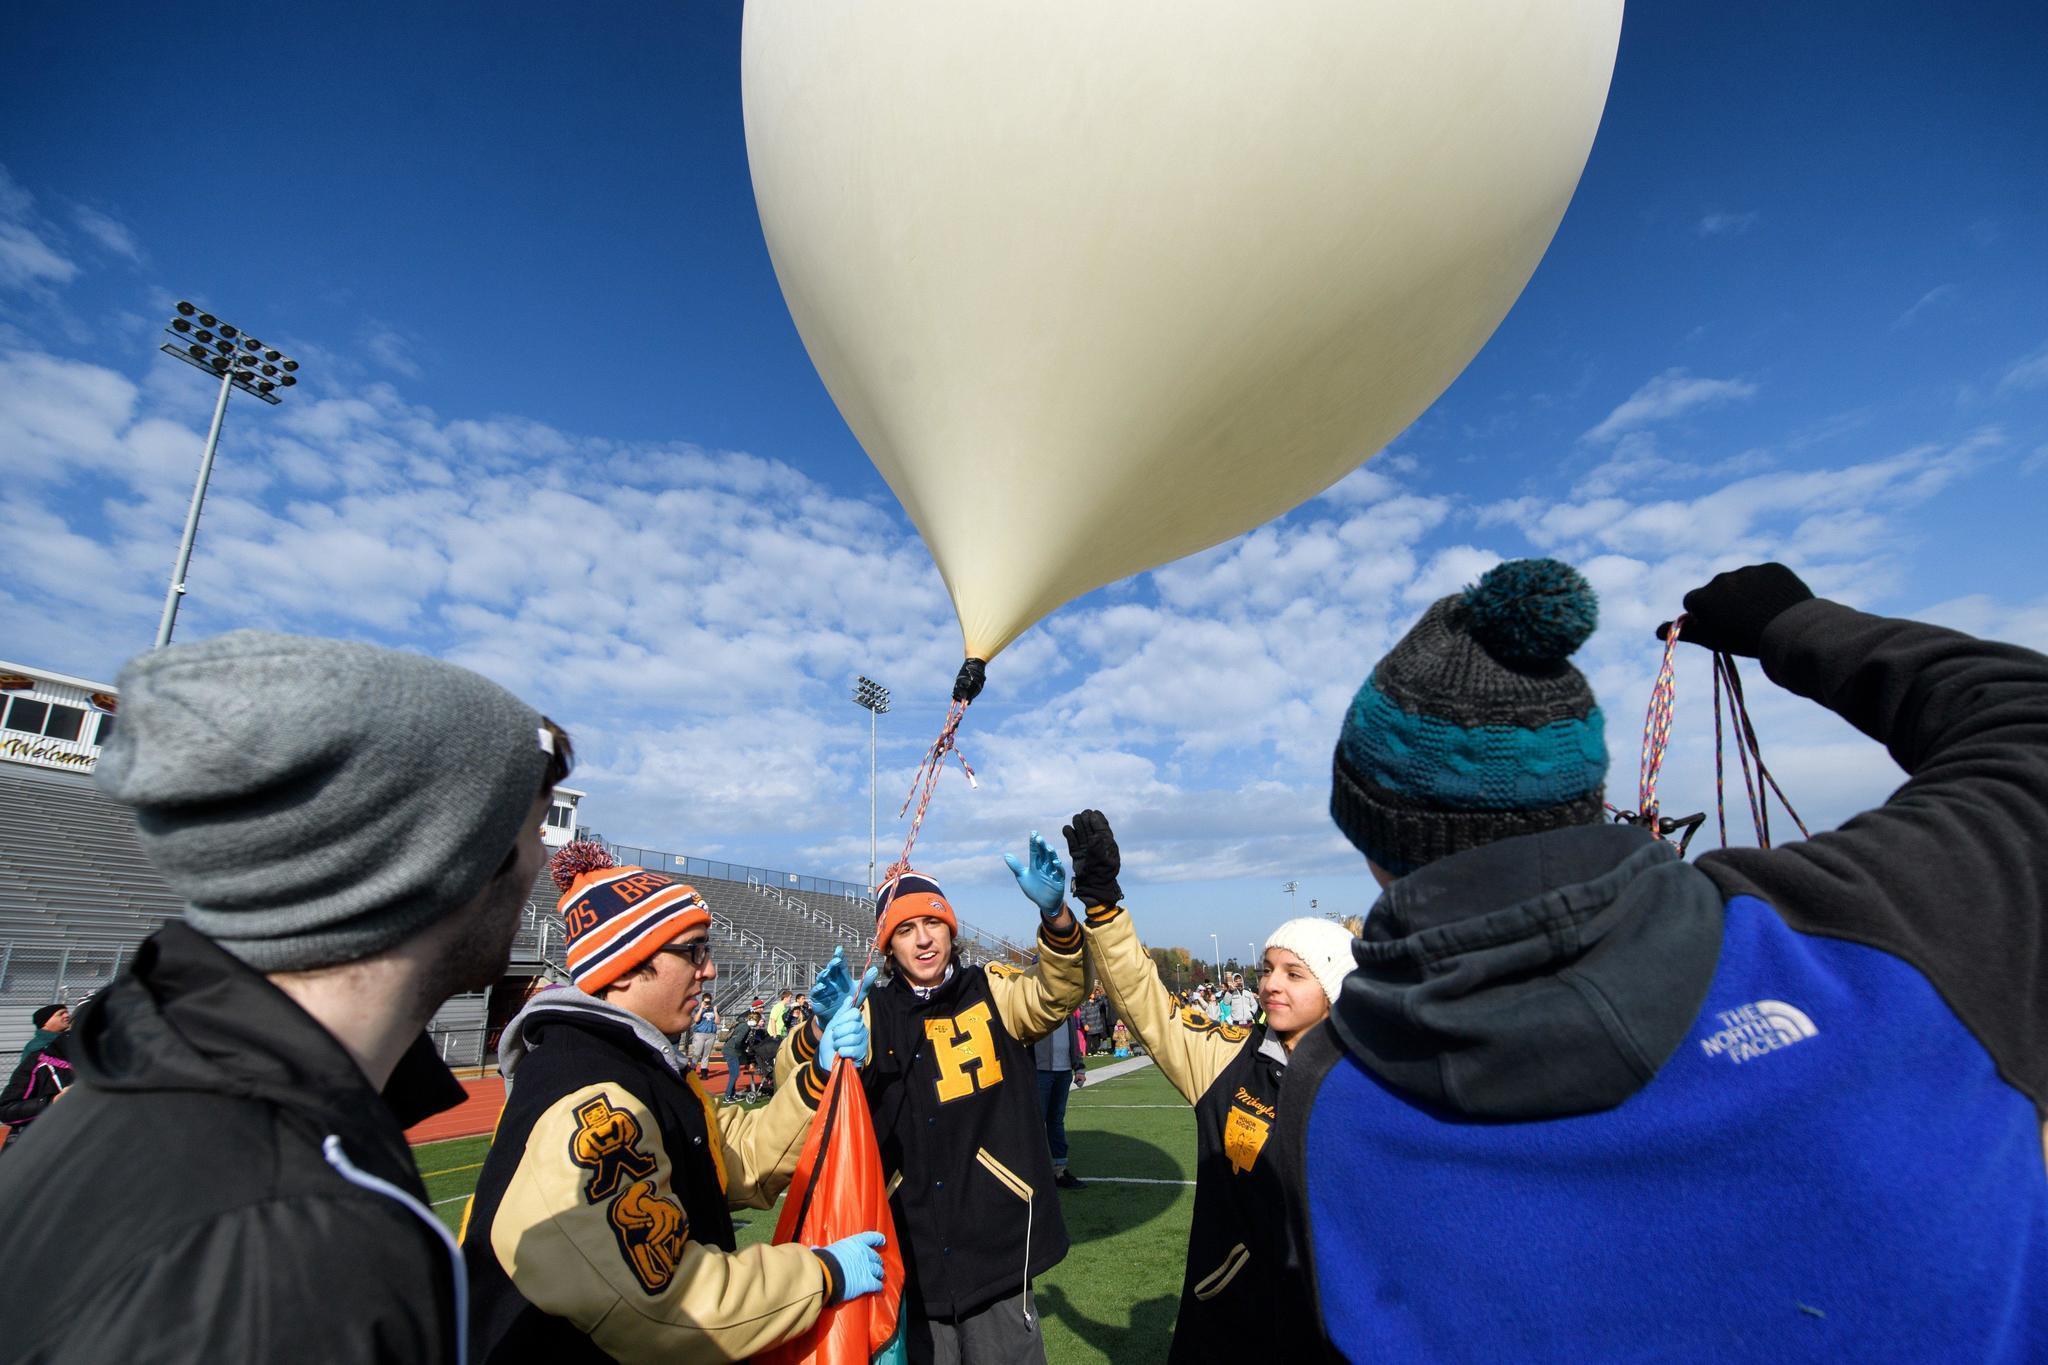 With ham radios and GoPro cameras, Hobart students track weather balloons into Ohio